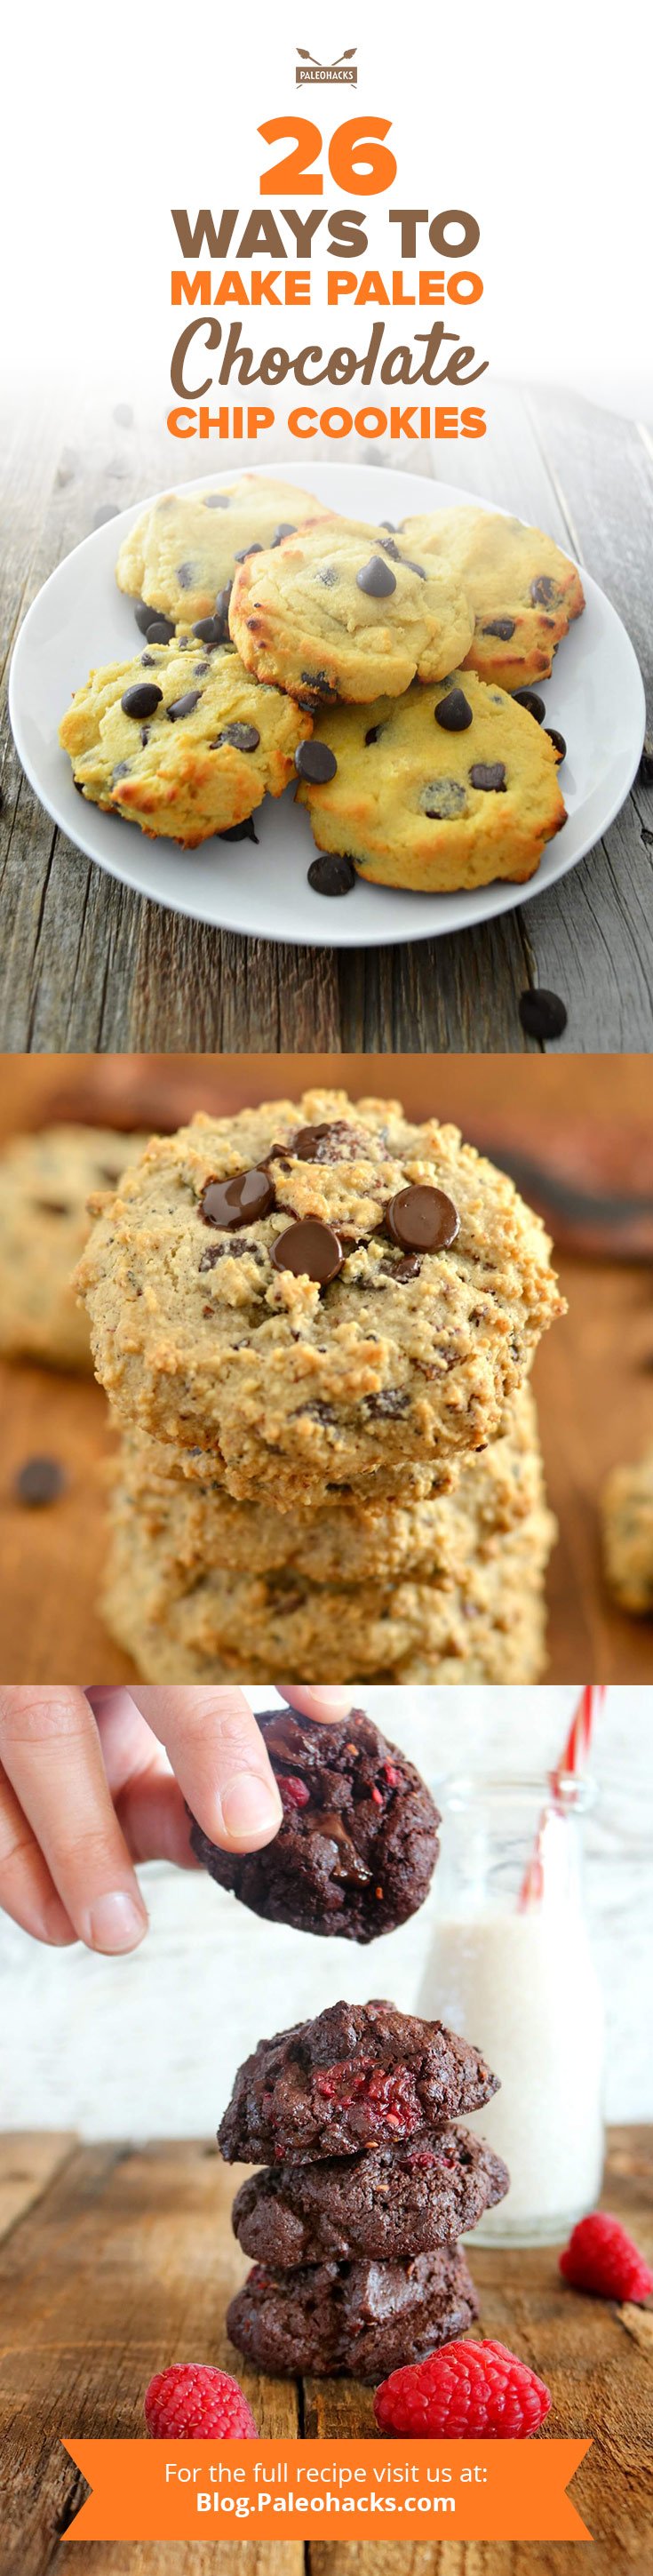 Try 26 different Paleo chocolate chip cookie recipes with avocado, pumpkin and plantains! They're so good, you won't believe they're all Paleo.